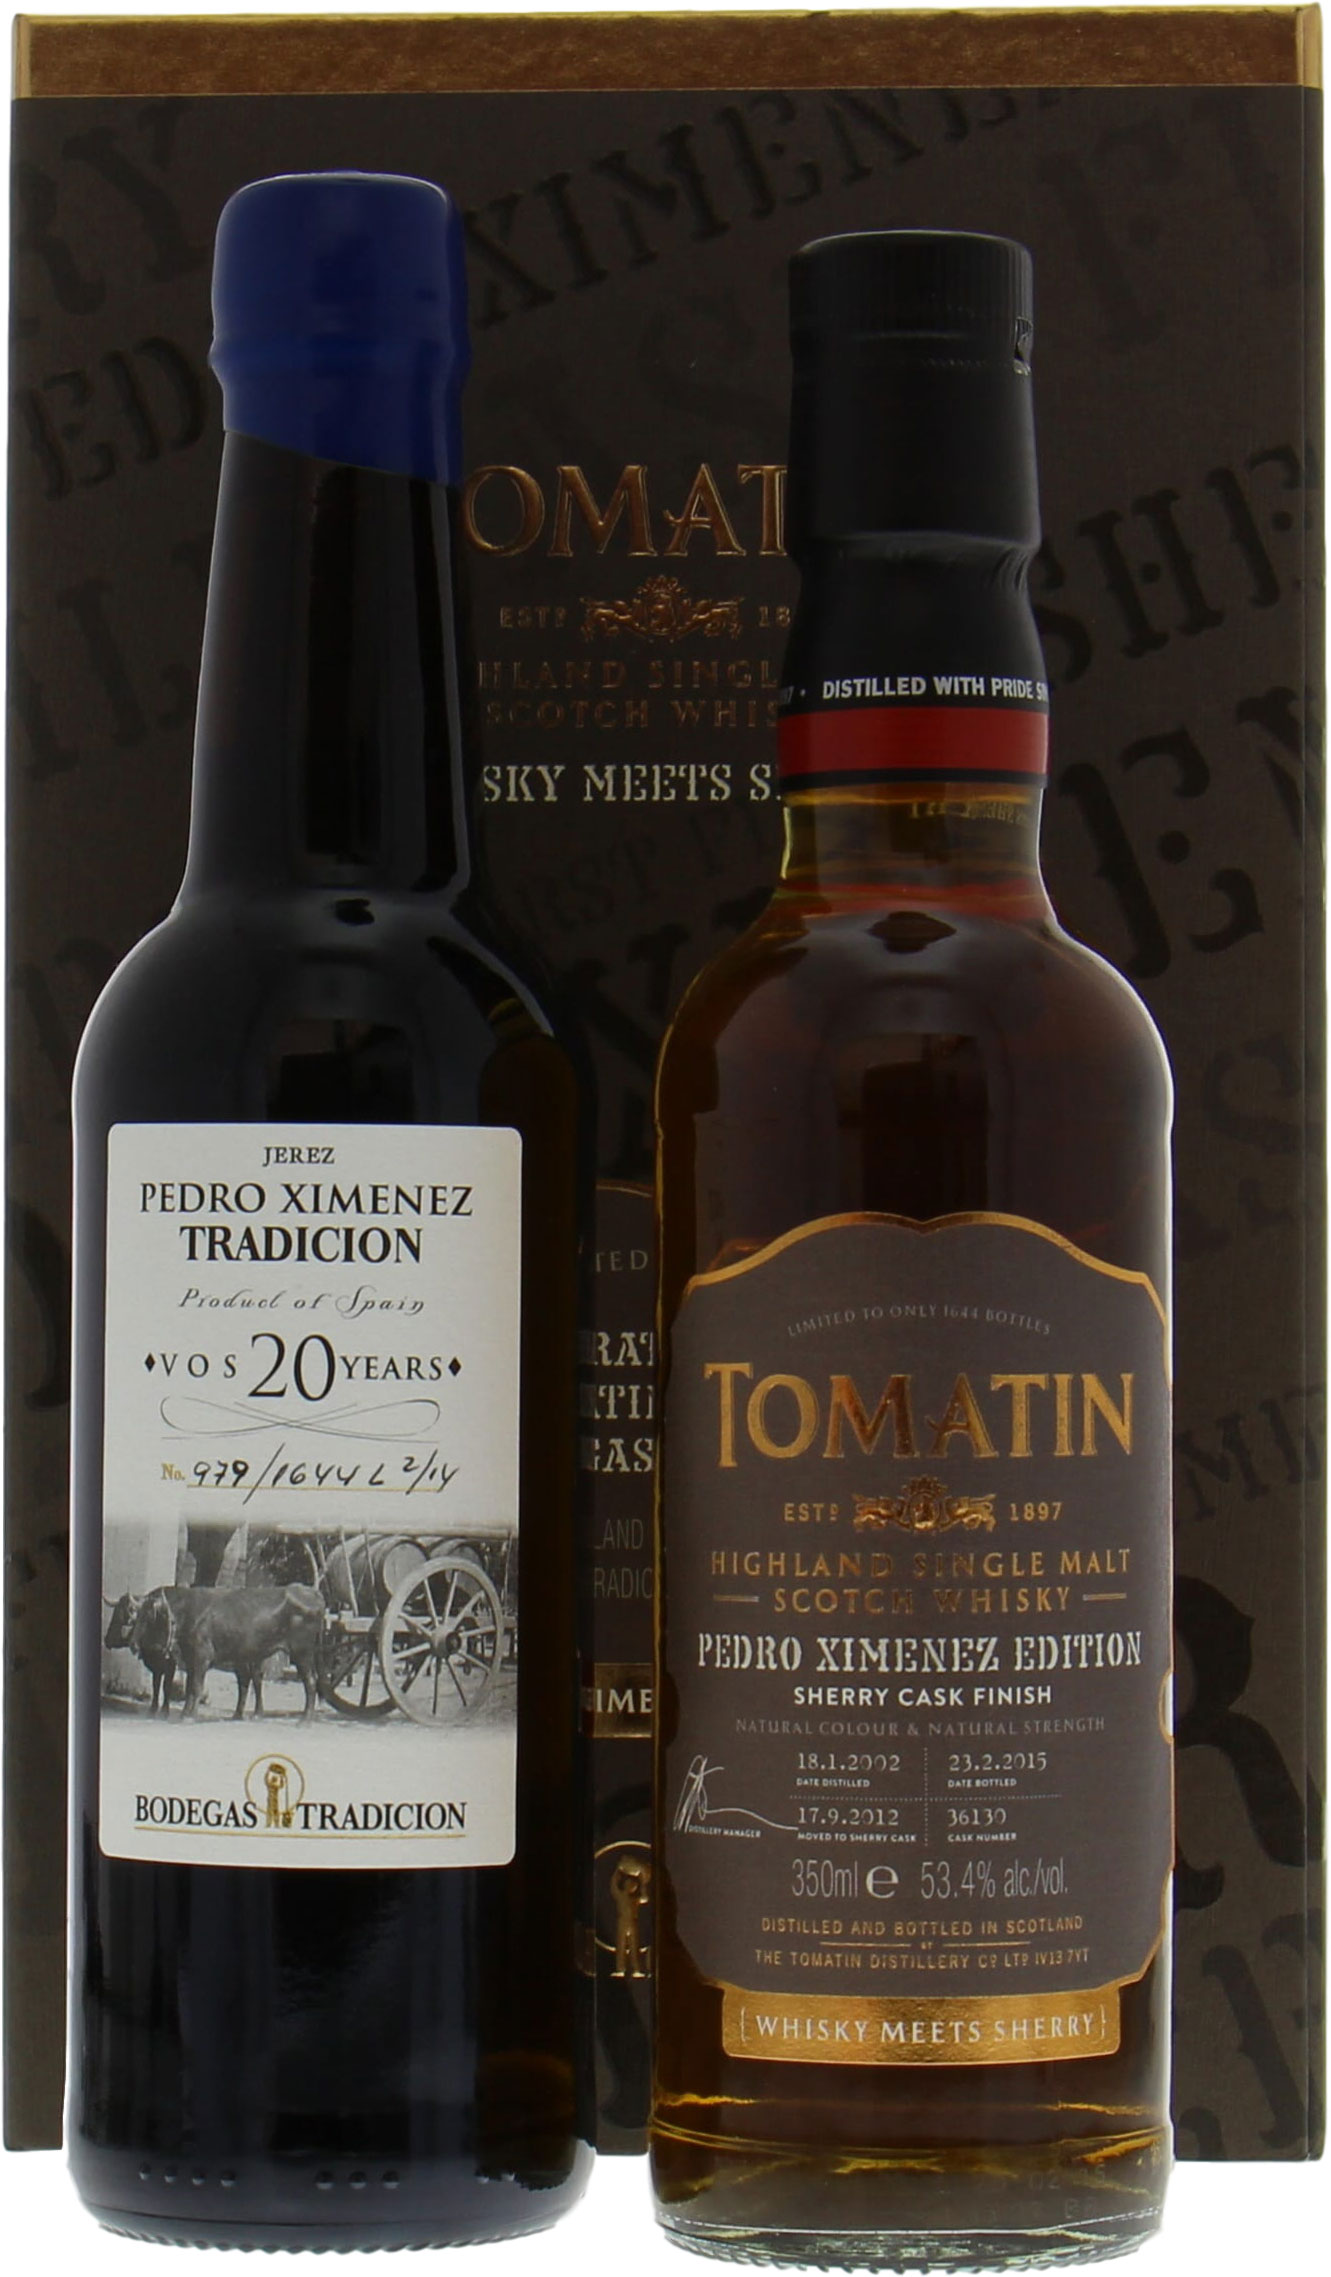 Tomatin - 13 Years Old Cask 36130 & 1 Bottle of PX Sherry 20 Years Old 53,4% 2002